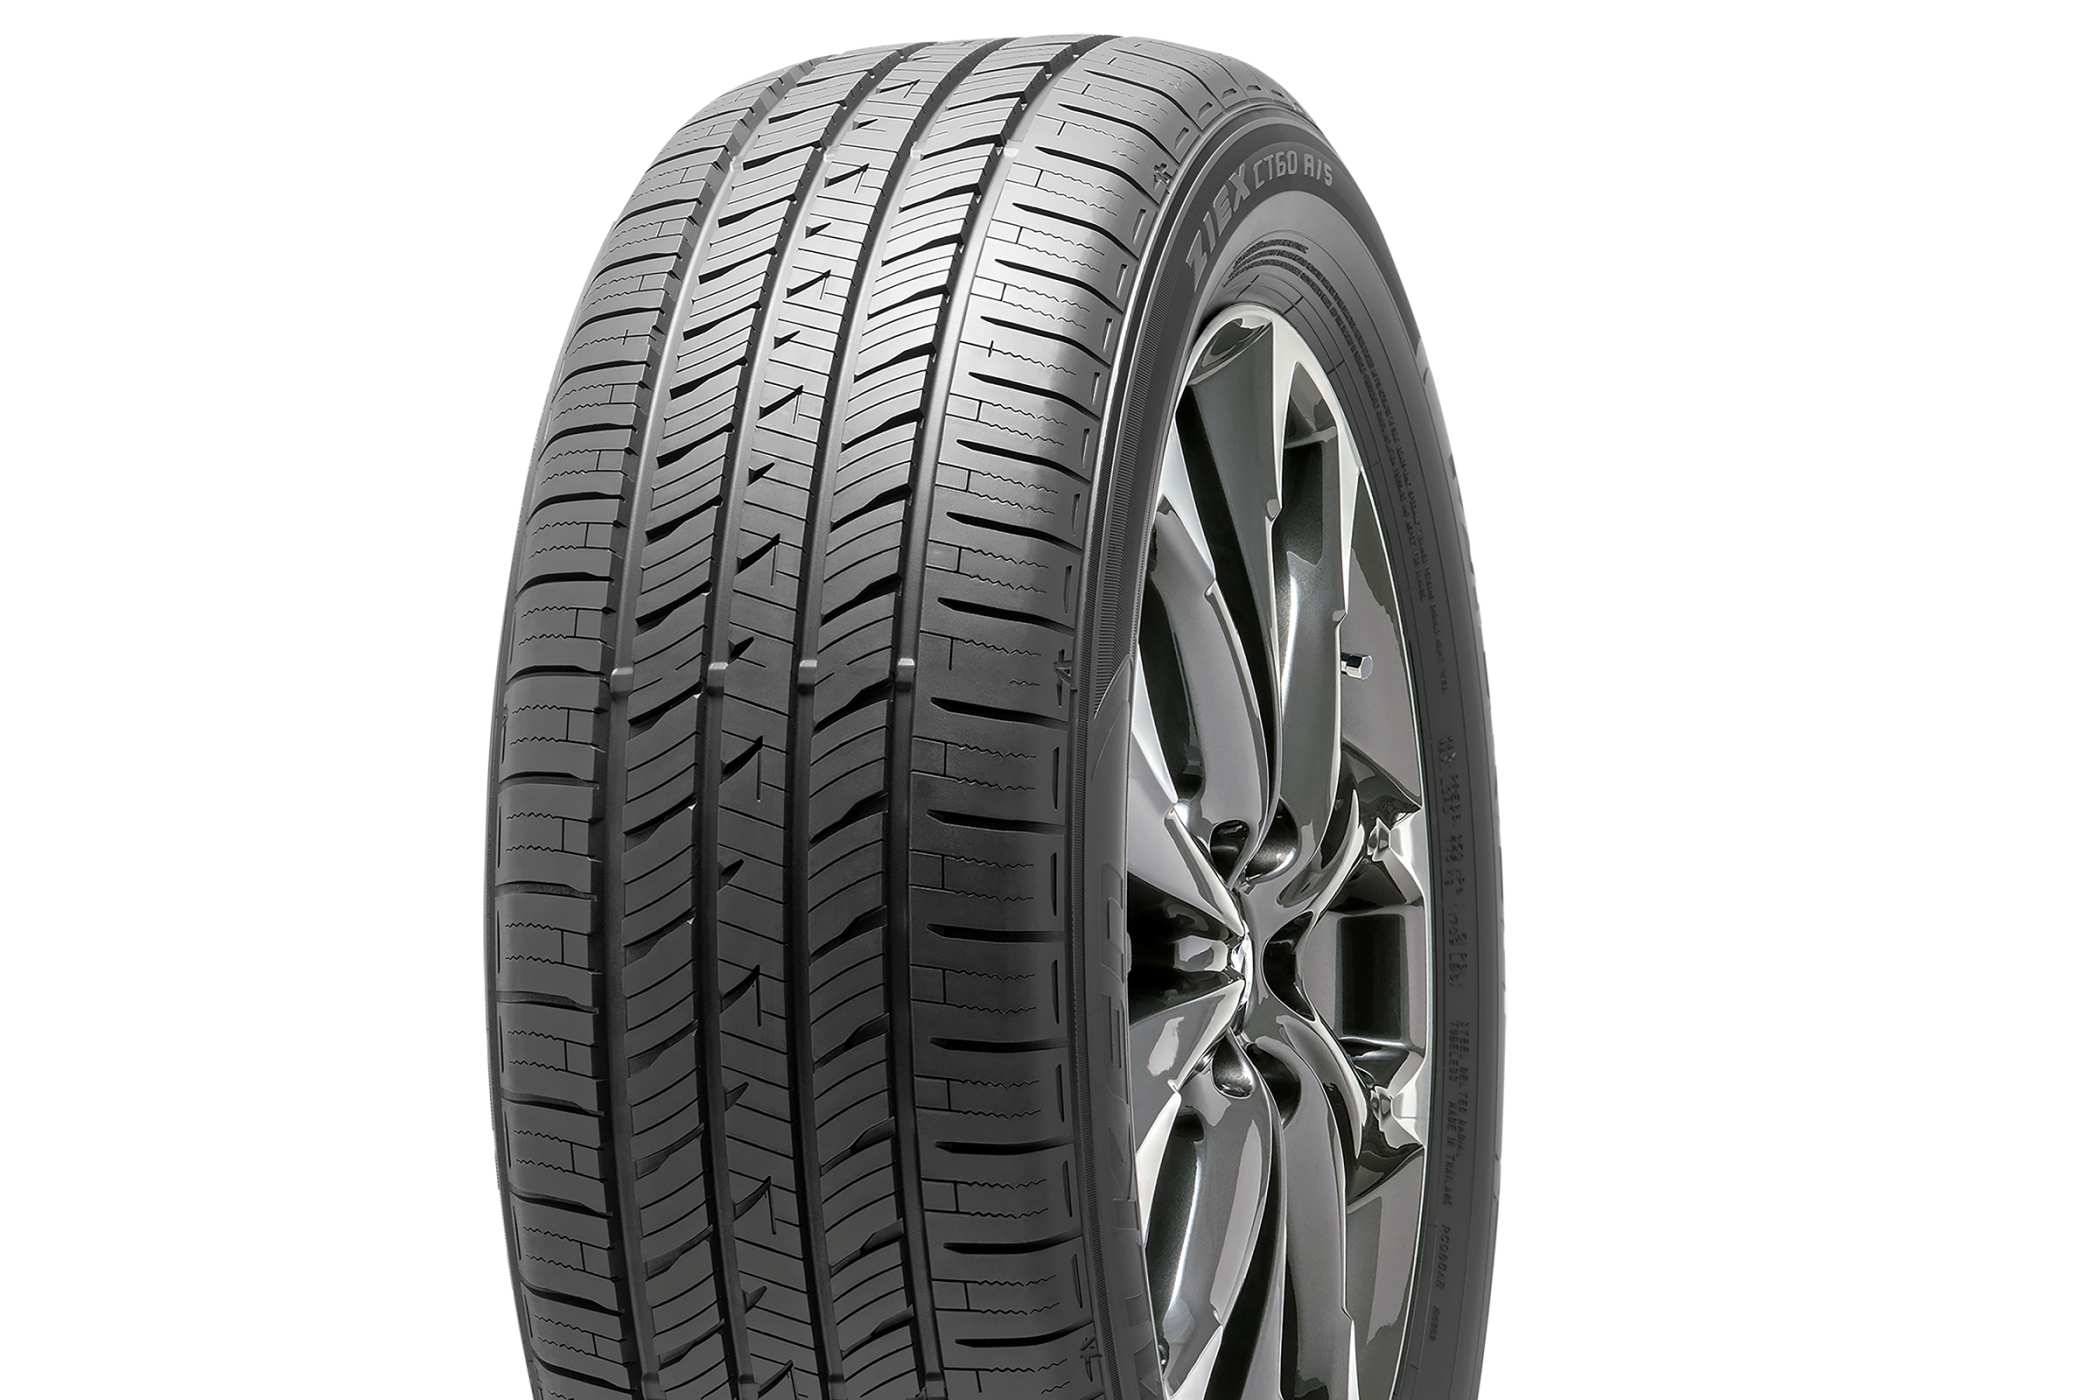 The Ziex CT60 is specifically designed for the SUV and CUV vehicle segments. Designing a tyre for SUVs posed different engineering requirements compared to developing tyres for passenger car or 4WD vehicles.